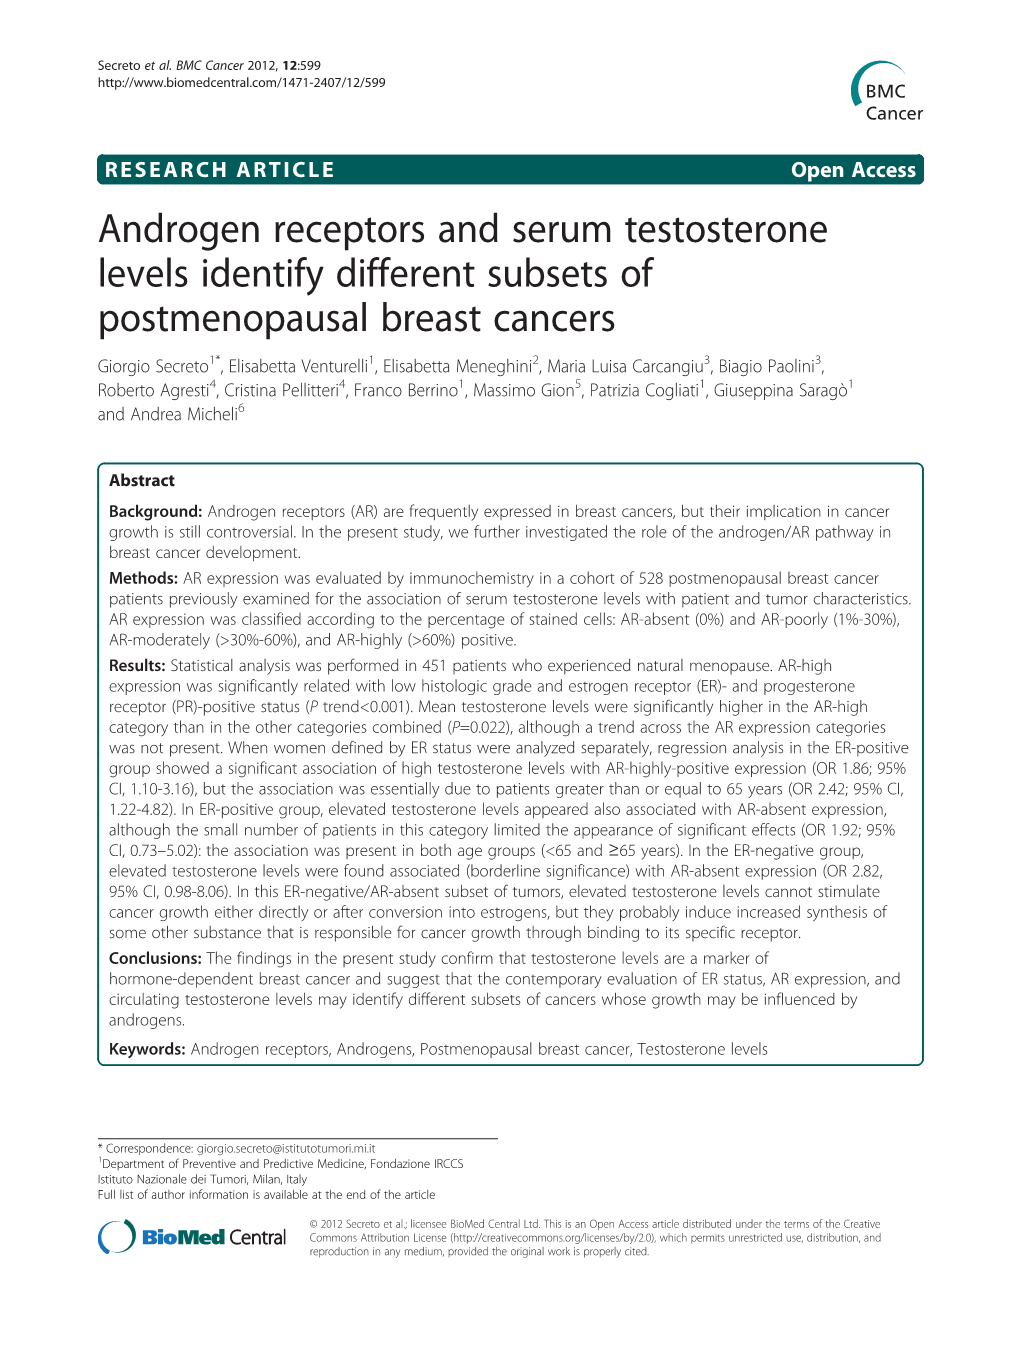 Androgen Receptors and Serum Testosterone Levels Identify Different